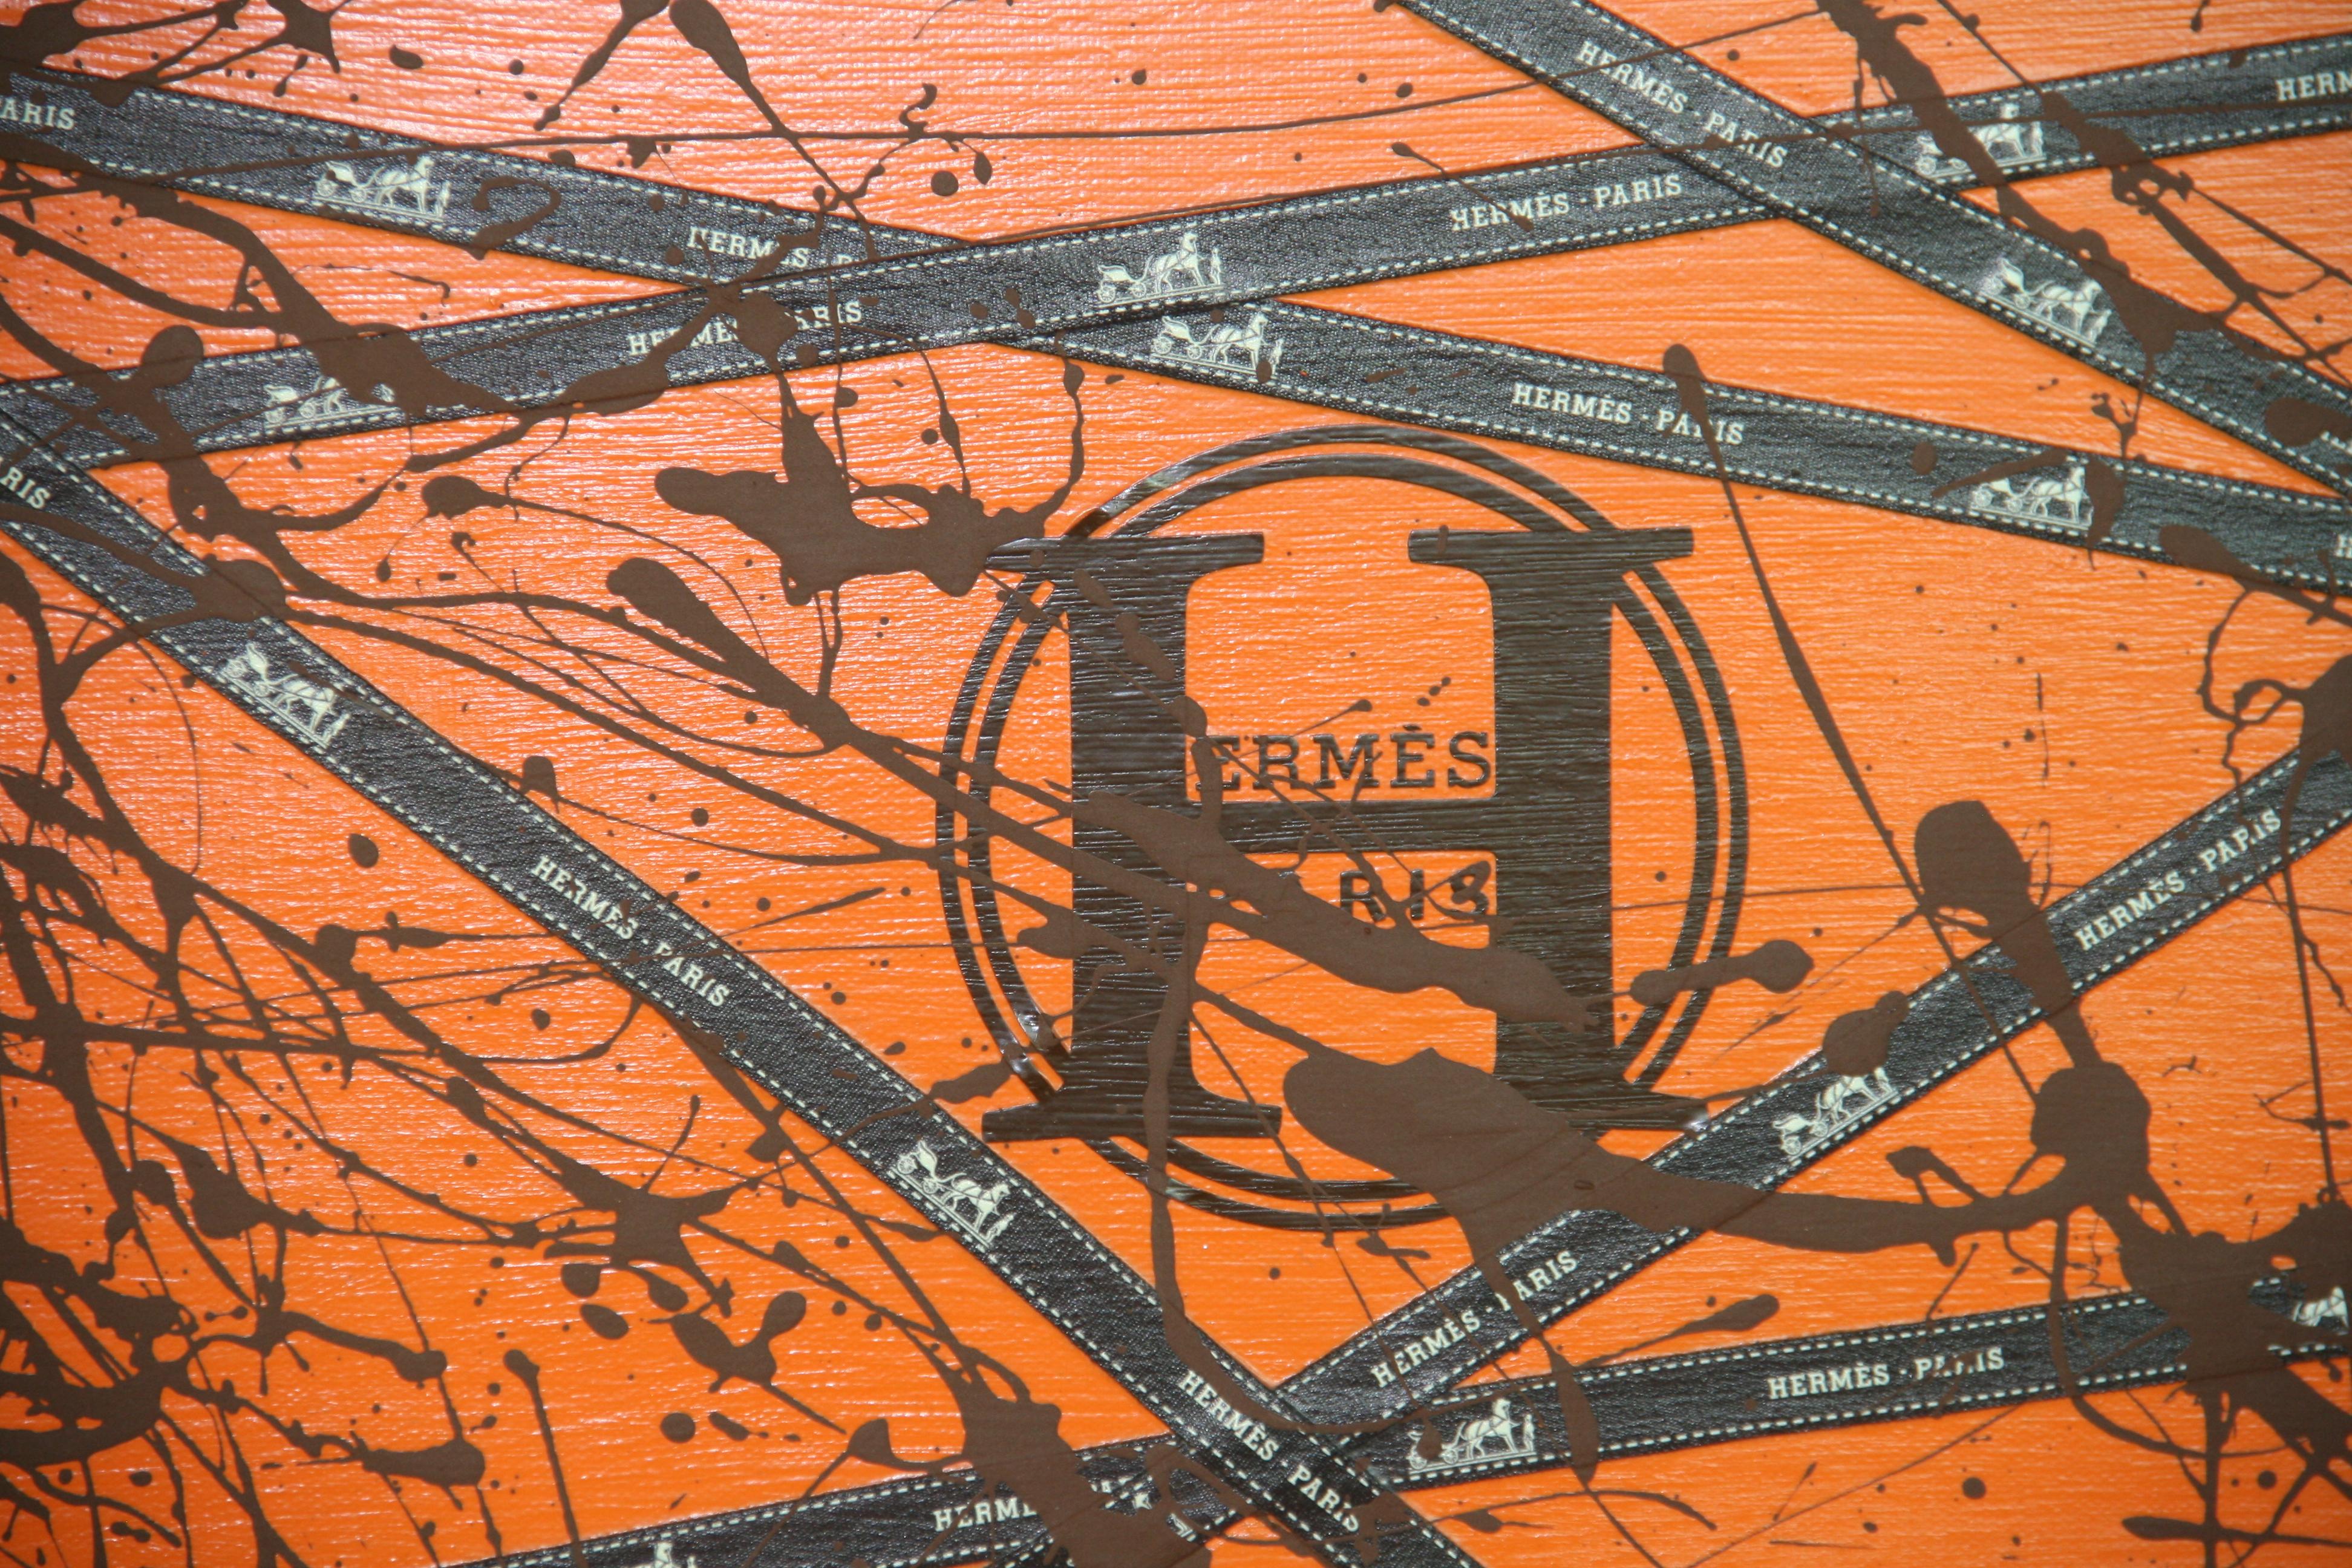 5015 Hermes Modern French ribbons and orange acrylic on rapped canvas 
Signed K.Jones 2020
